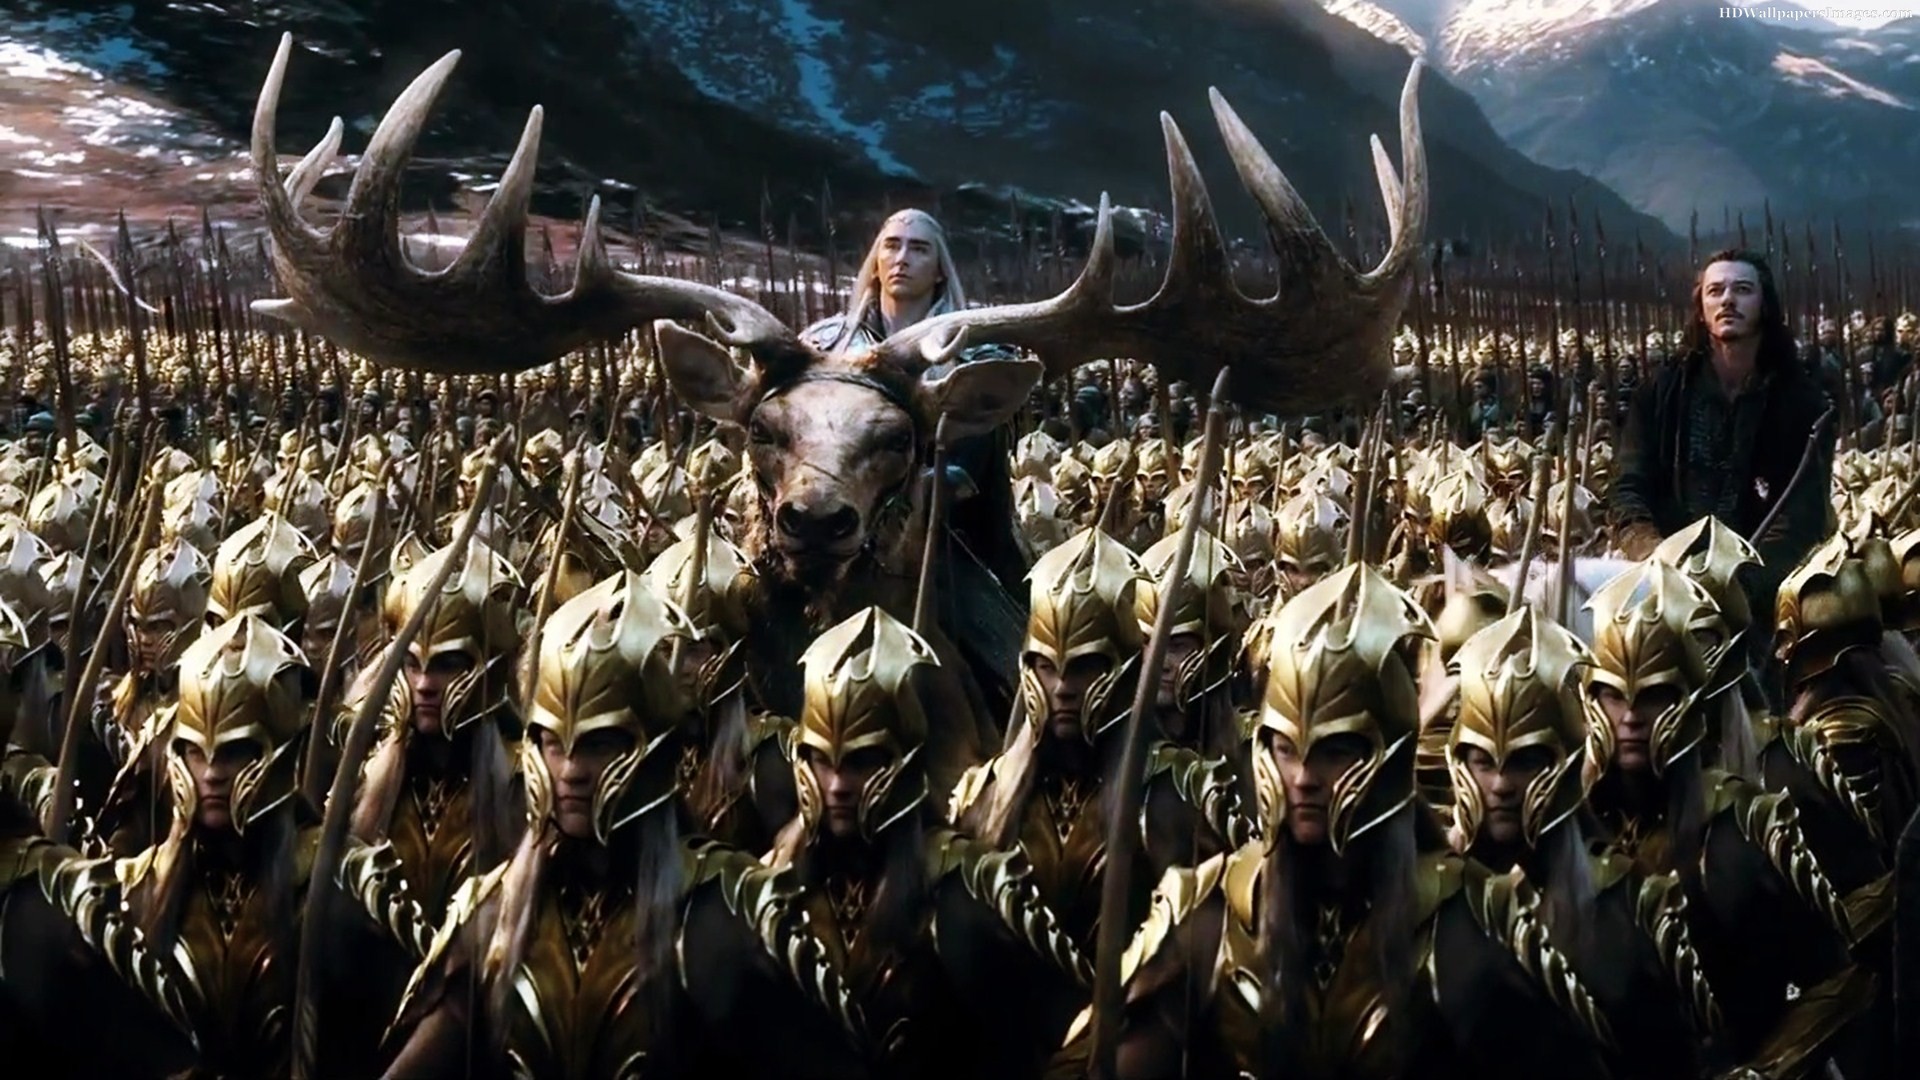 hobbit-the-battle-of-the-five-armies-golden-army-images.jpg